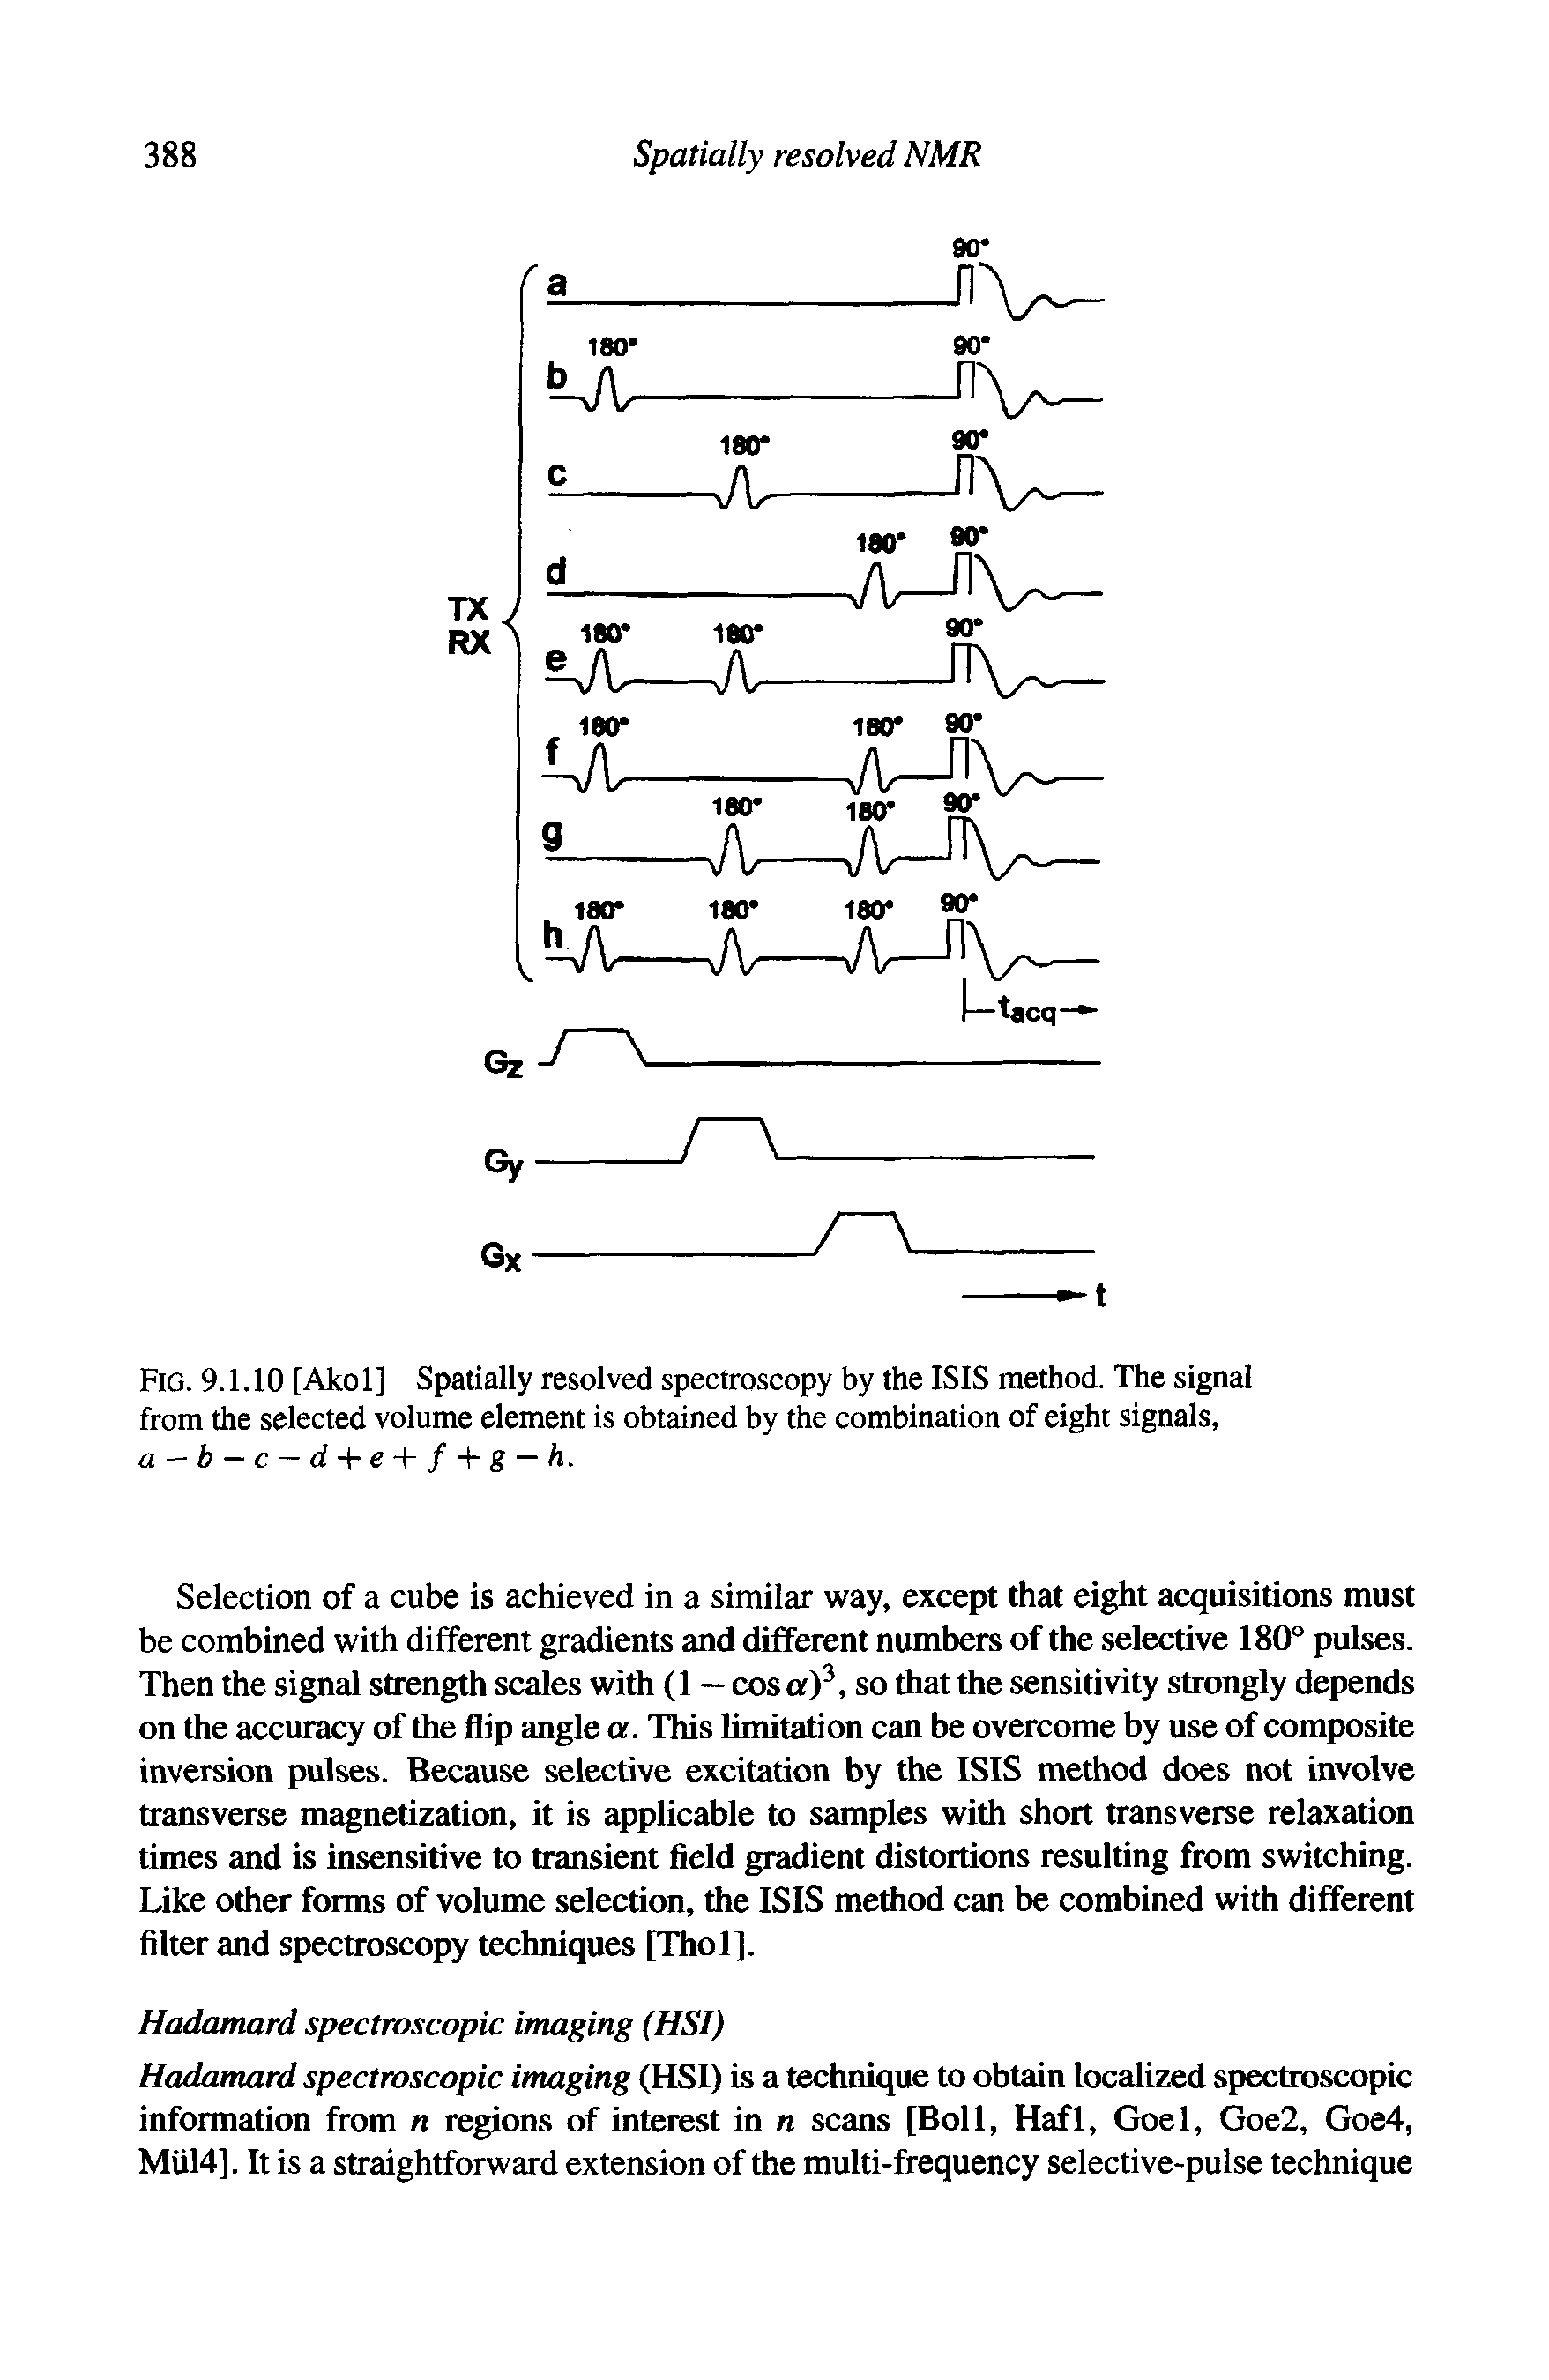 Fig. 9.1.10 [Akol] Spatially resolved spectroscopy by the ISIS method. The signal from the selected volume element is obtained by the combination of eight signals, a — b — c — d + e + f + g — h.